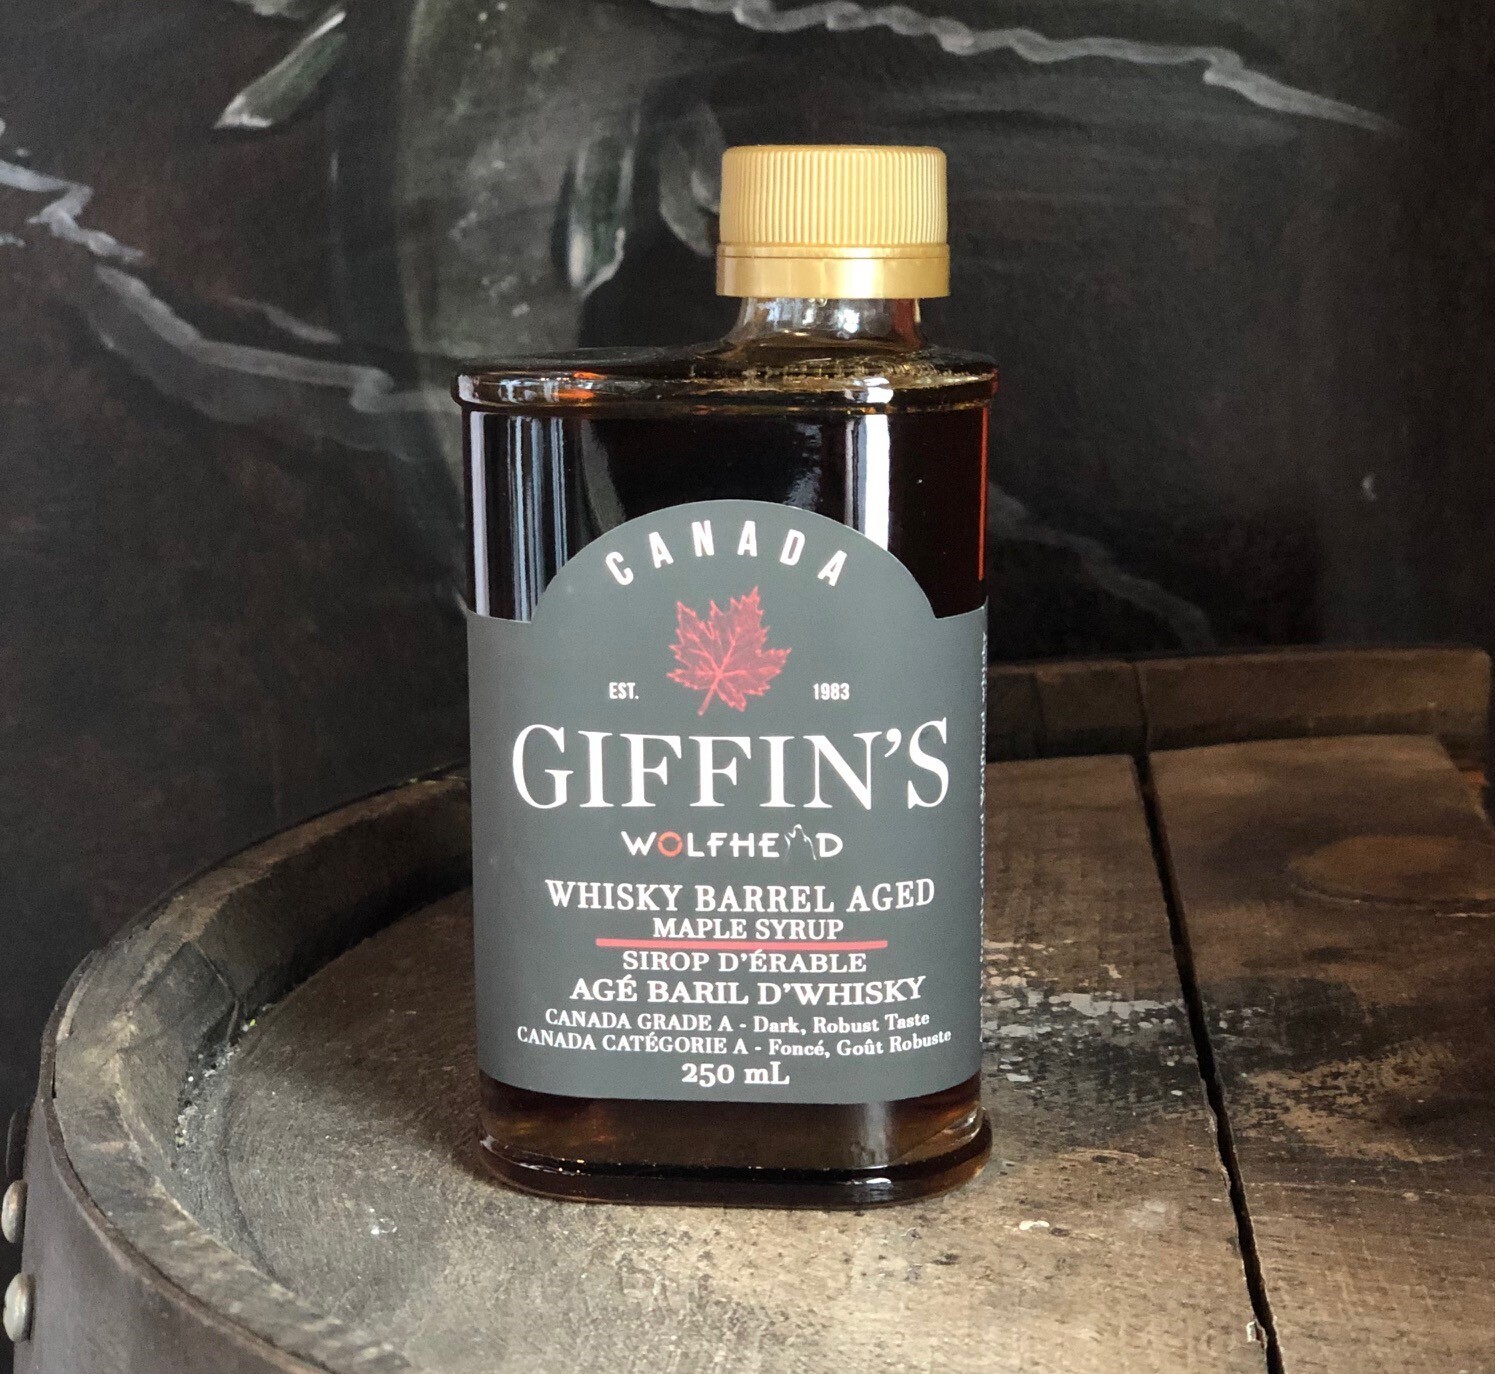 Giffin's Wolfhead Whiskey Barrel Aged Maple Syrup (100ml)